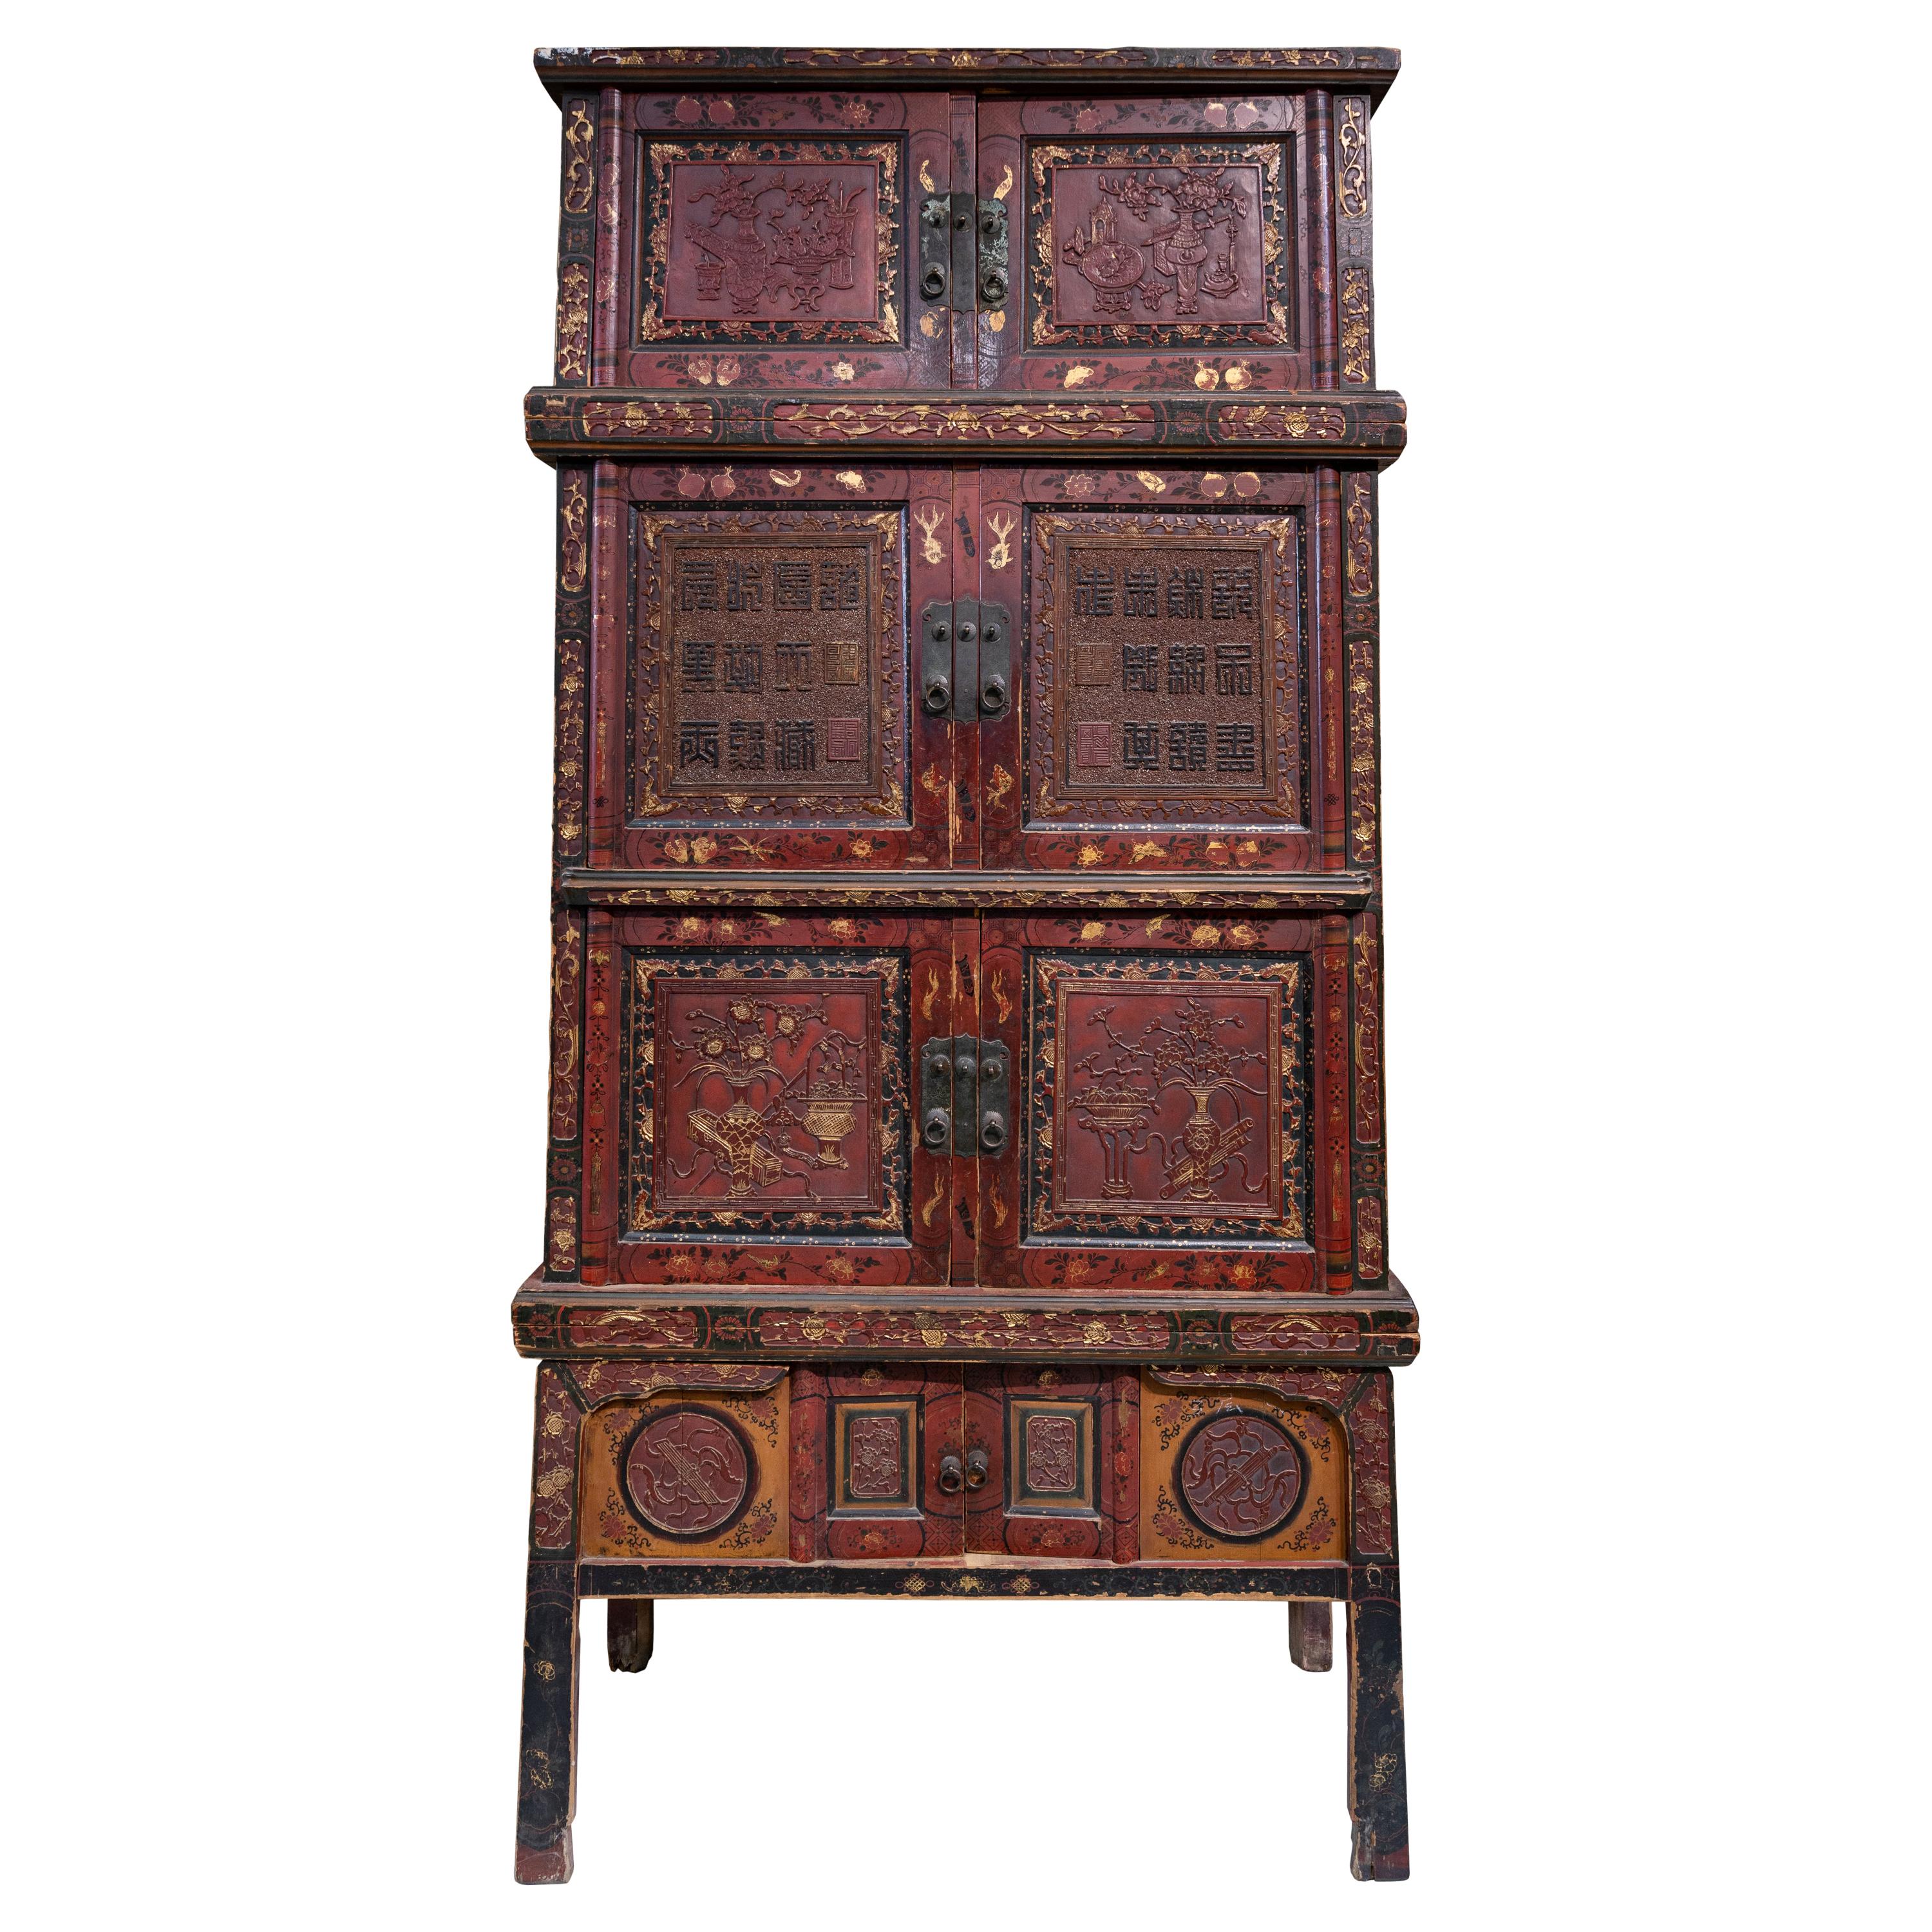 Late 19th Century 3-tier Cabinet from Fujian, China